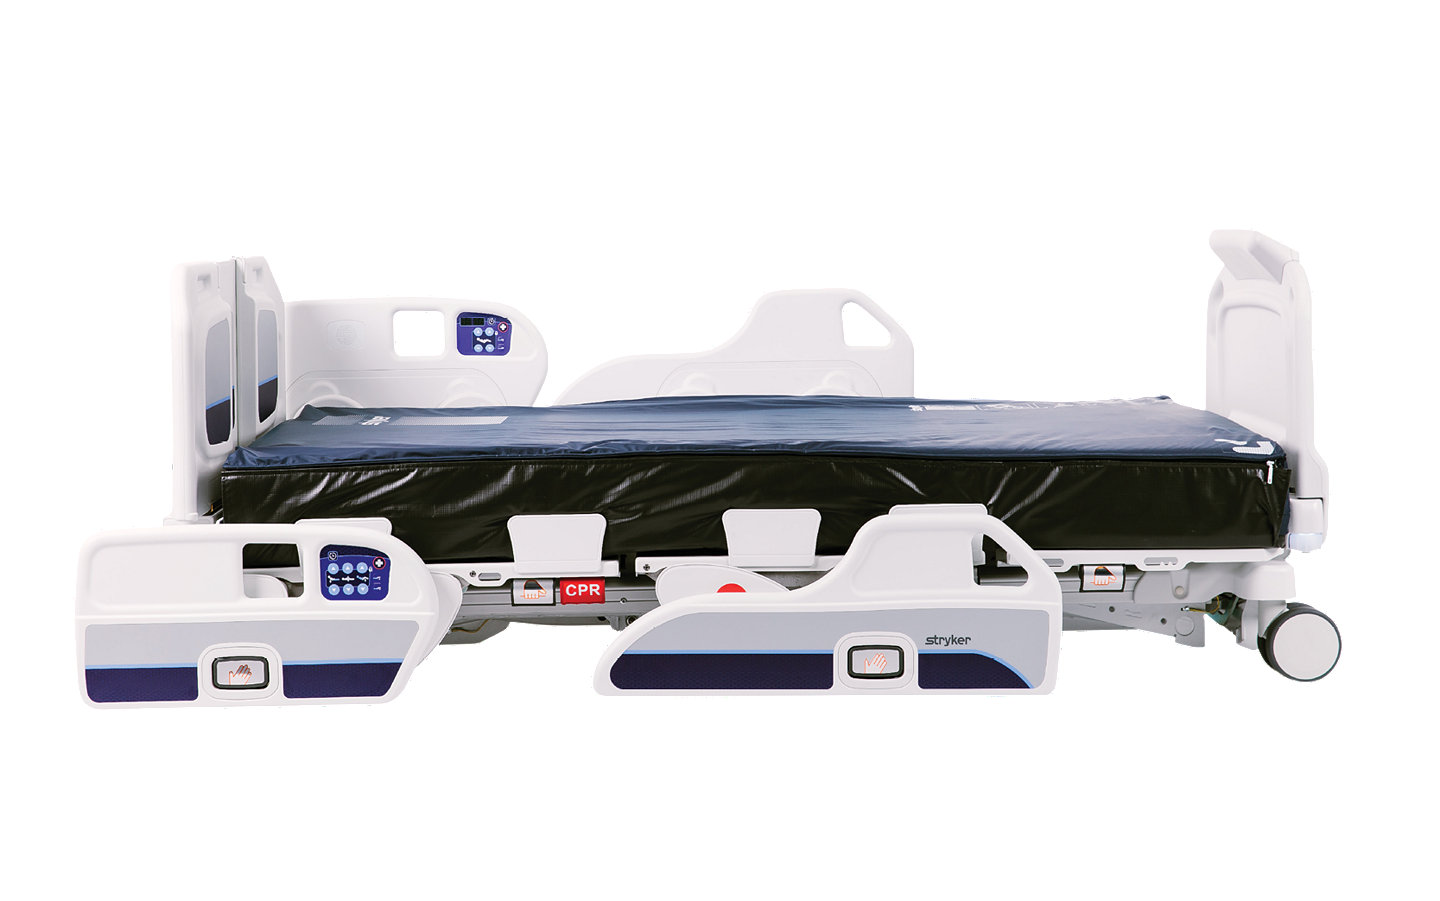 MV3 helps keep your patients safe and secure during their hospital stay with low bed height